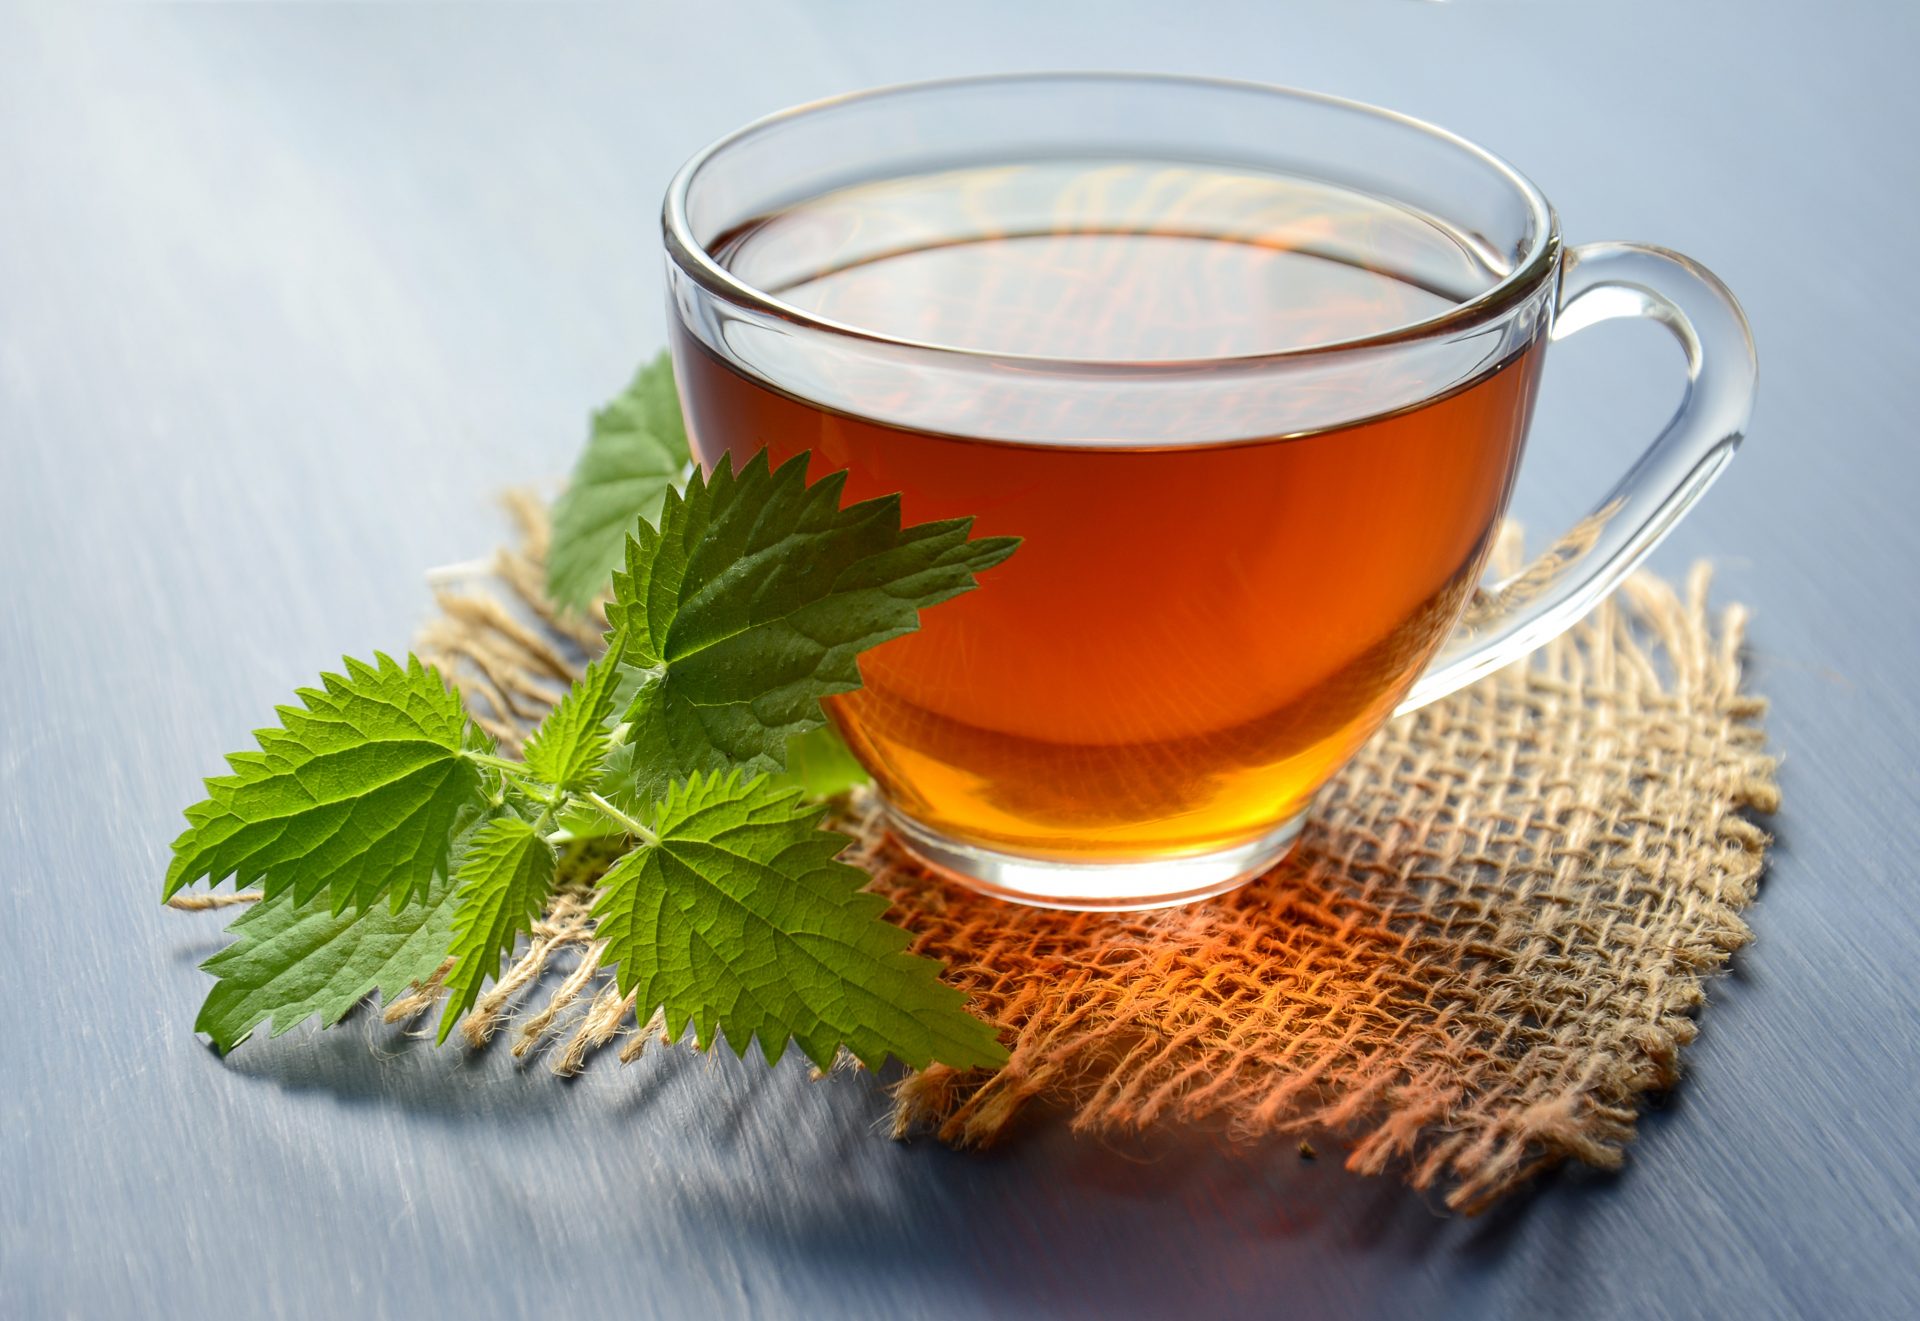 5 Things You Shouldn't Combine With Tea